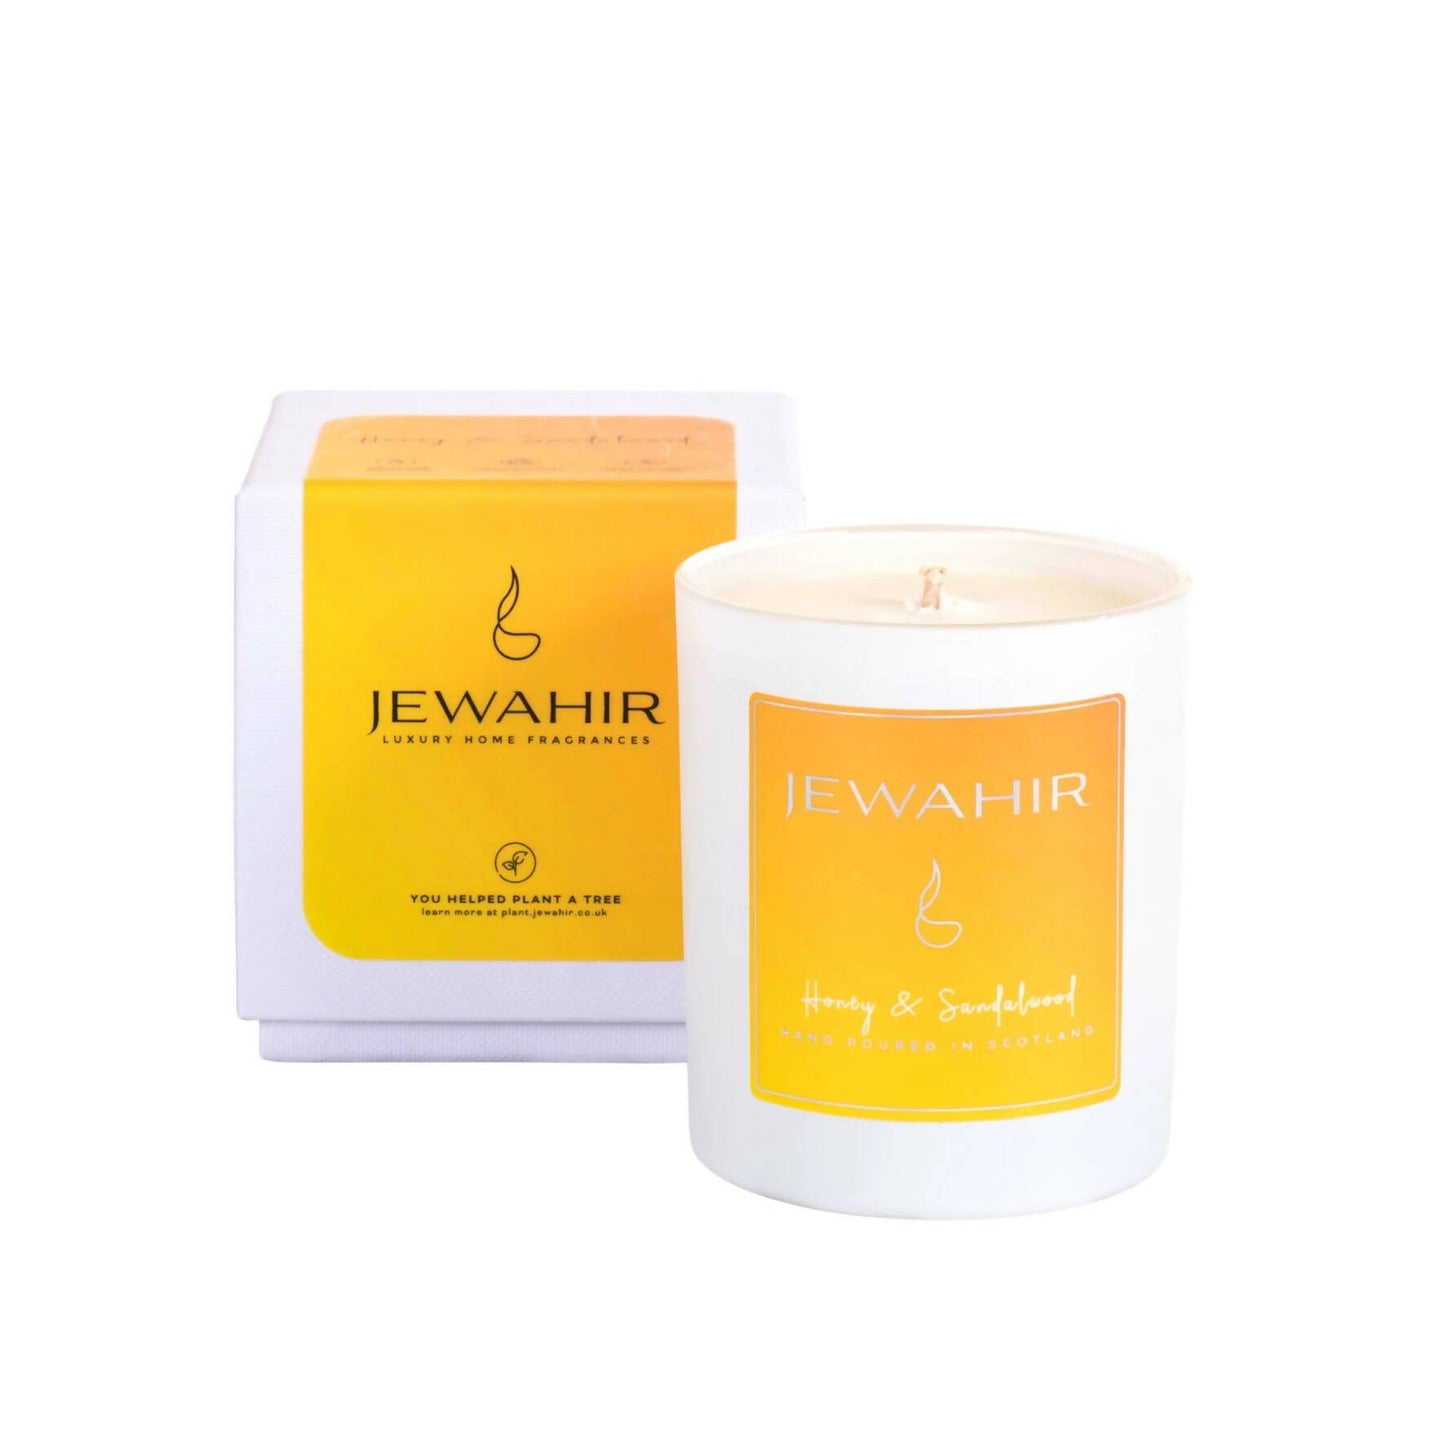 Honey & Sandalwood Scented Coconut/Soy Wax Candle